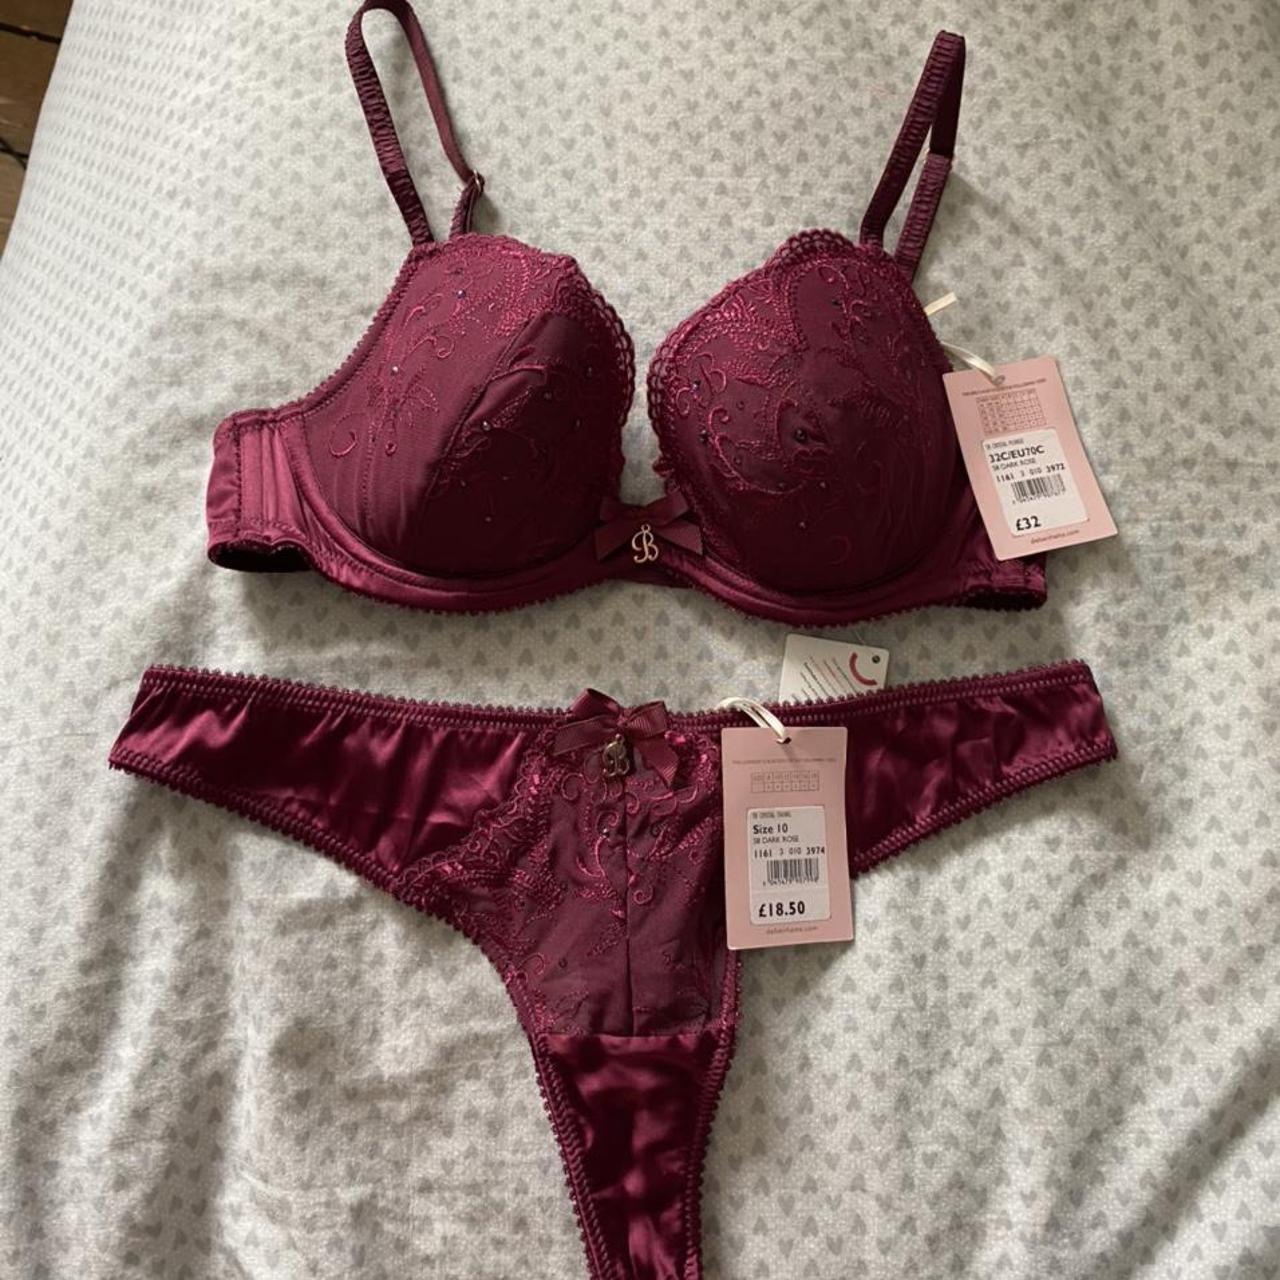 BNWT Ted Baker Underwear Set Seamless Ribbed Large Bra Top & Knickers